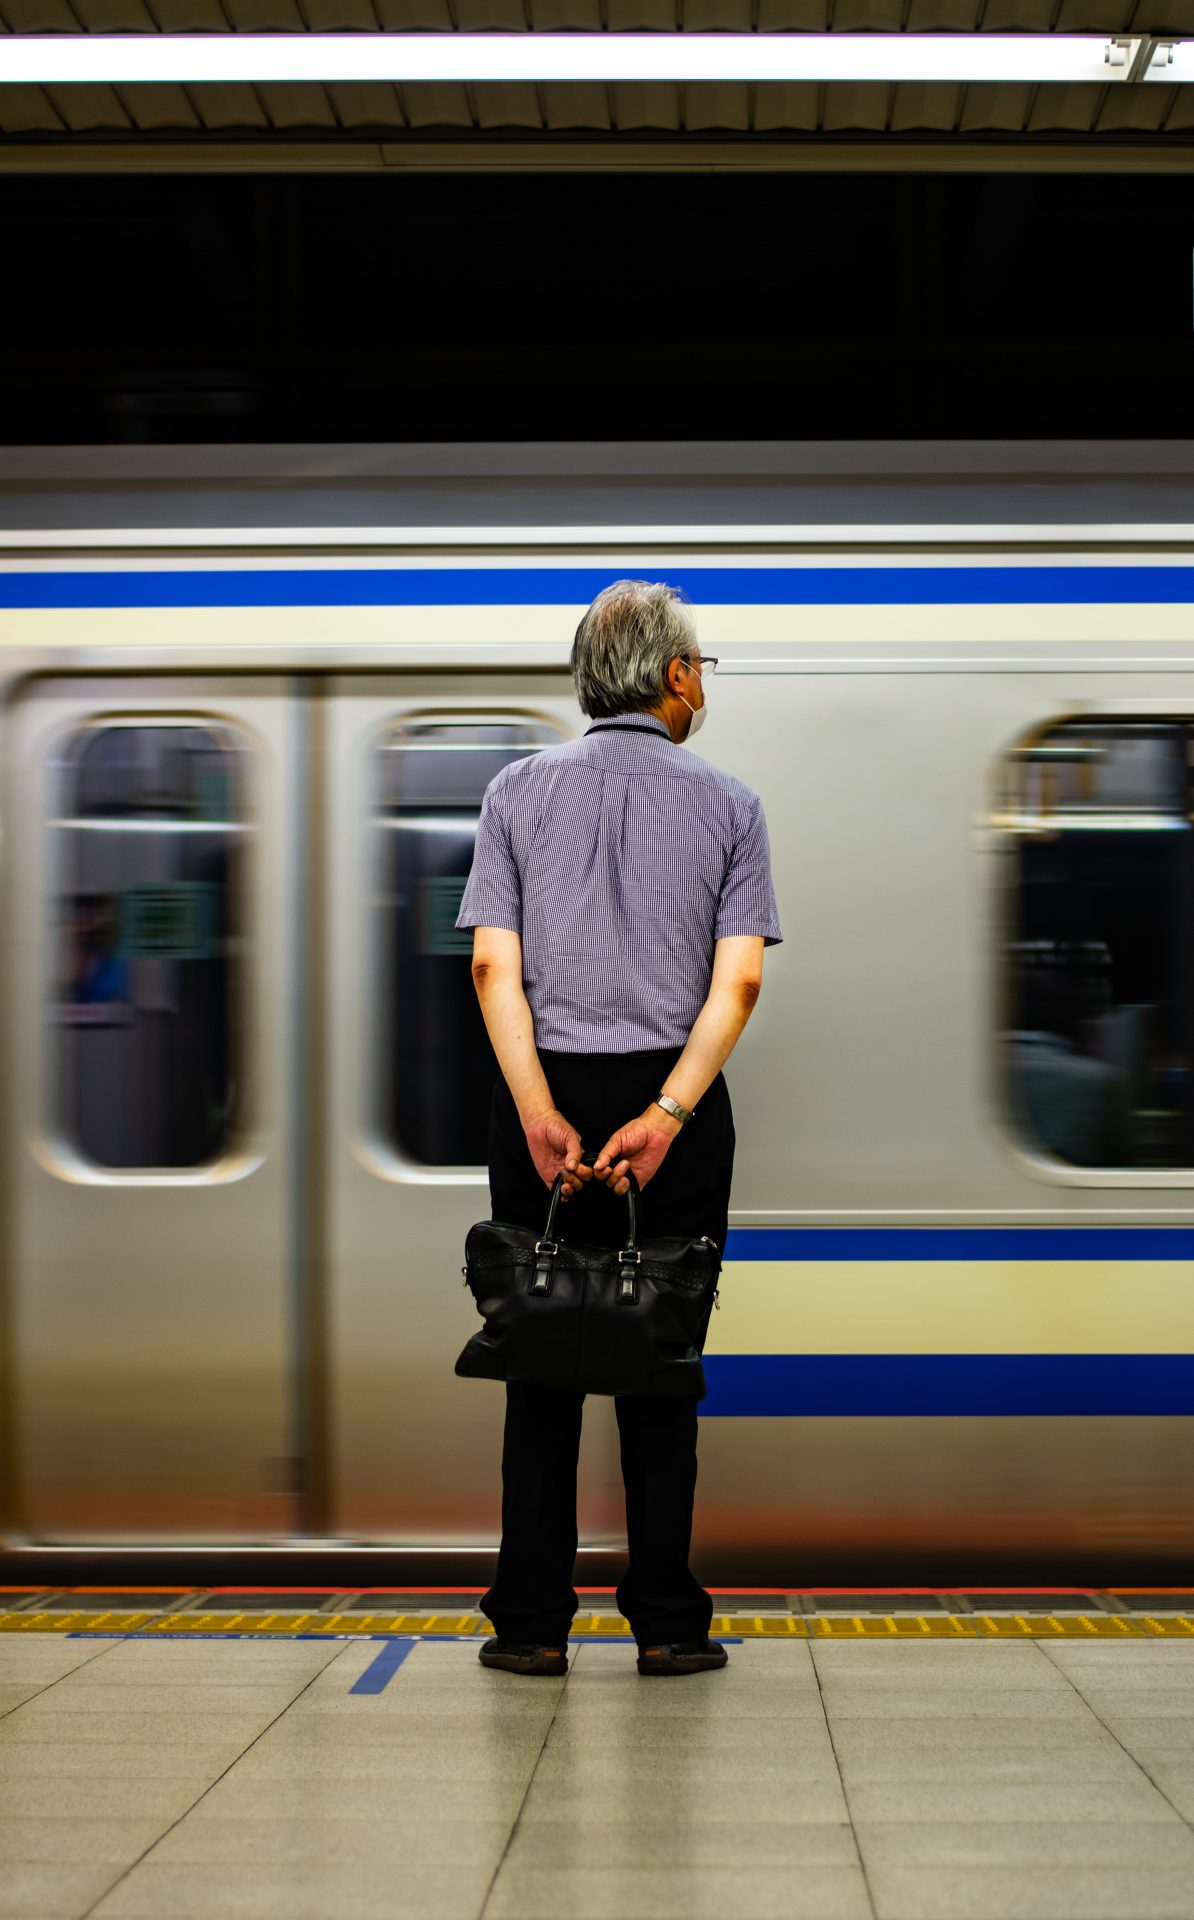 Waiting for the train in Tokyo, Japan